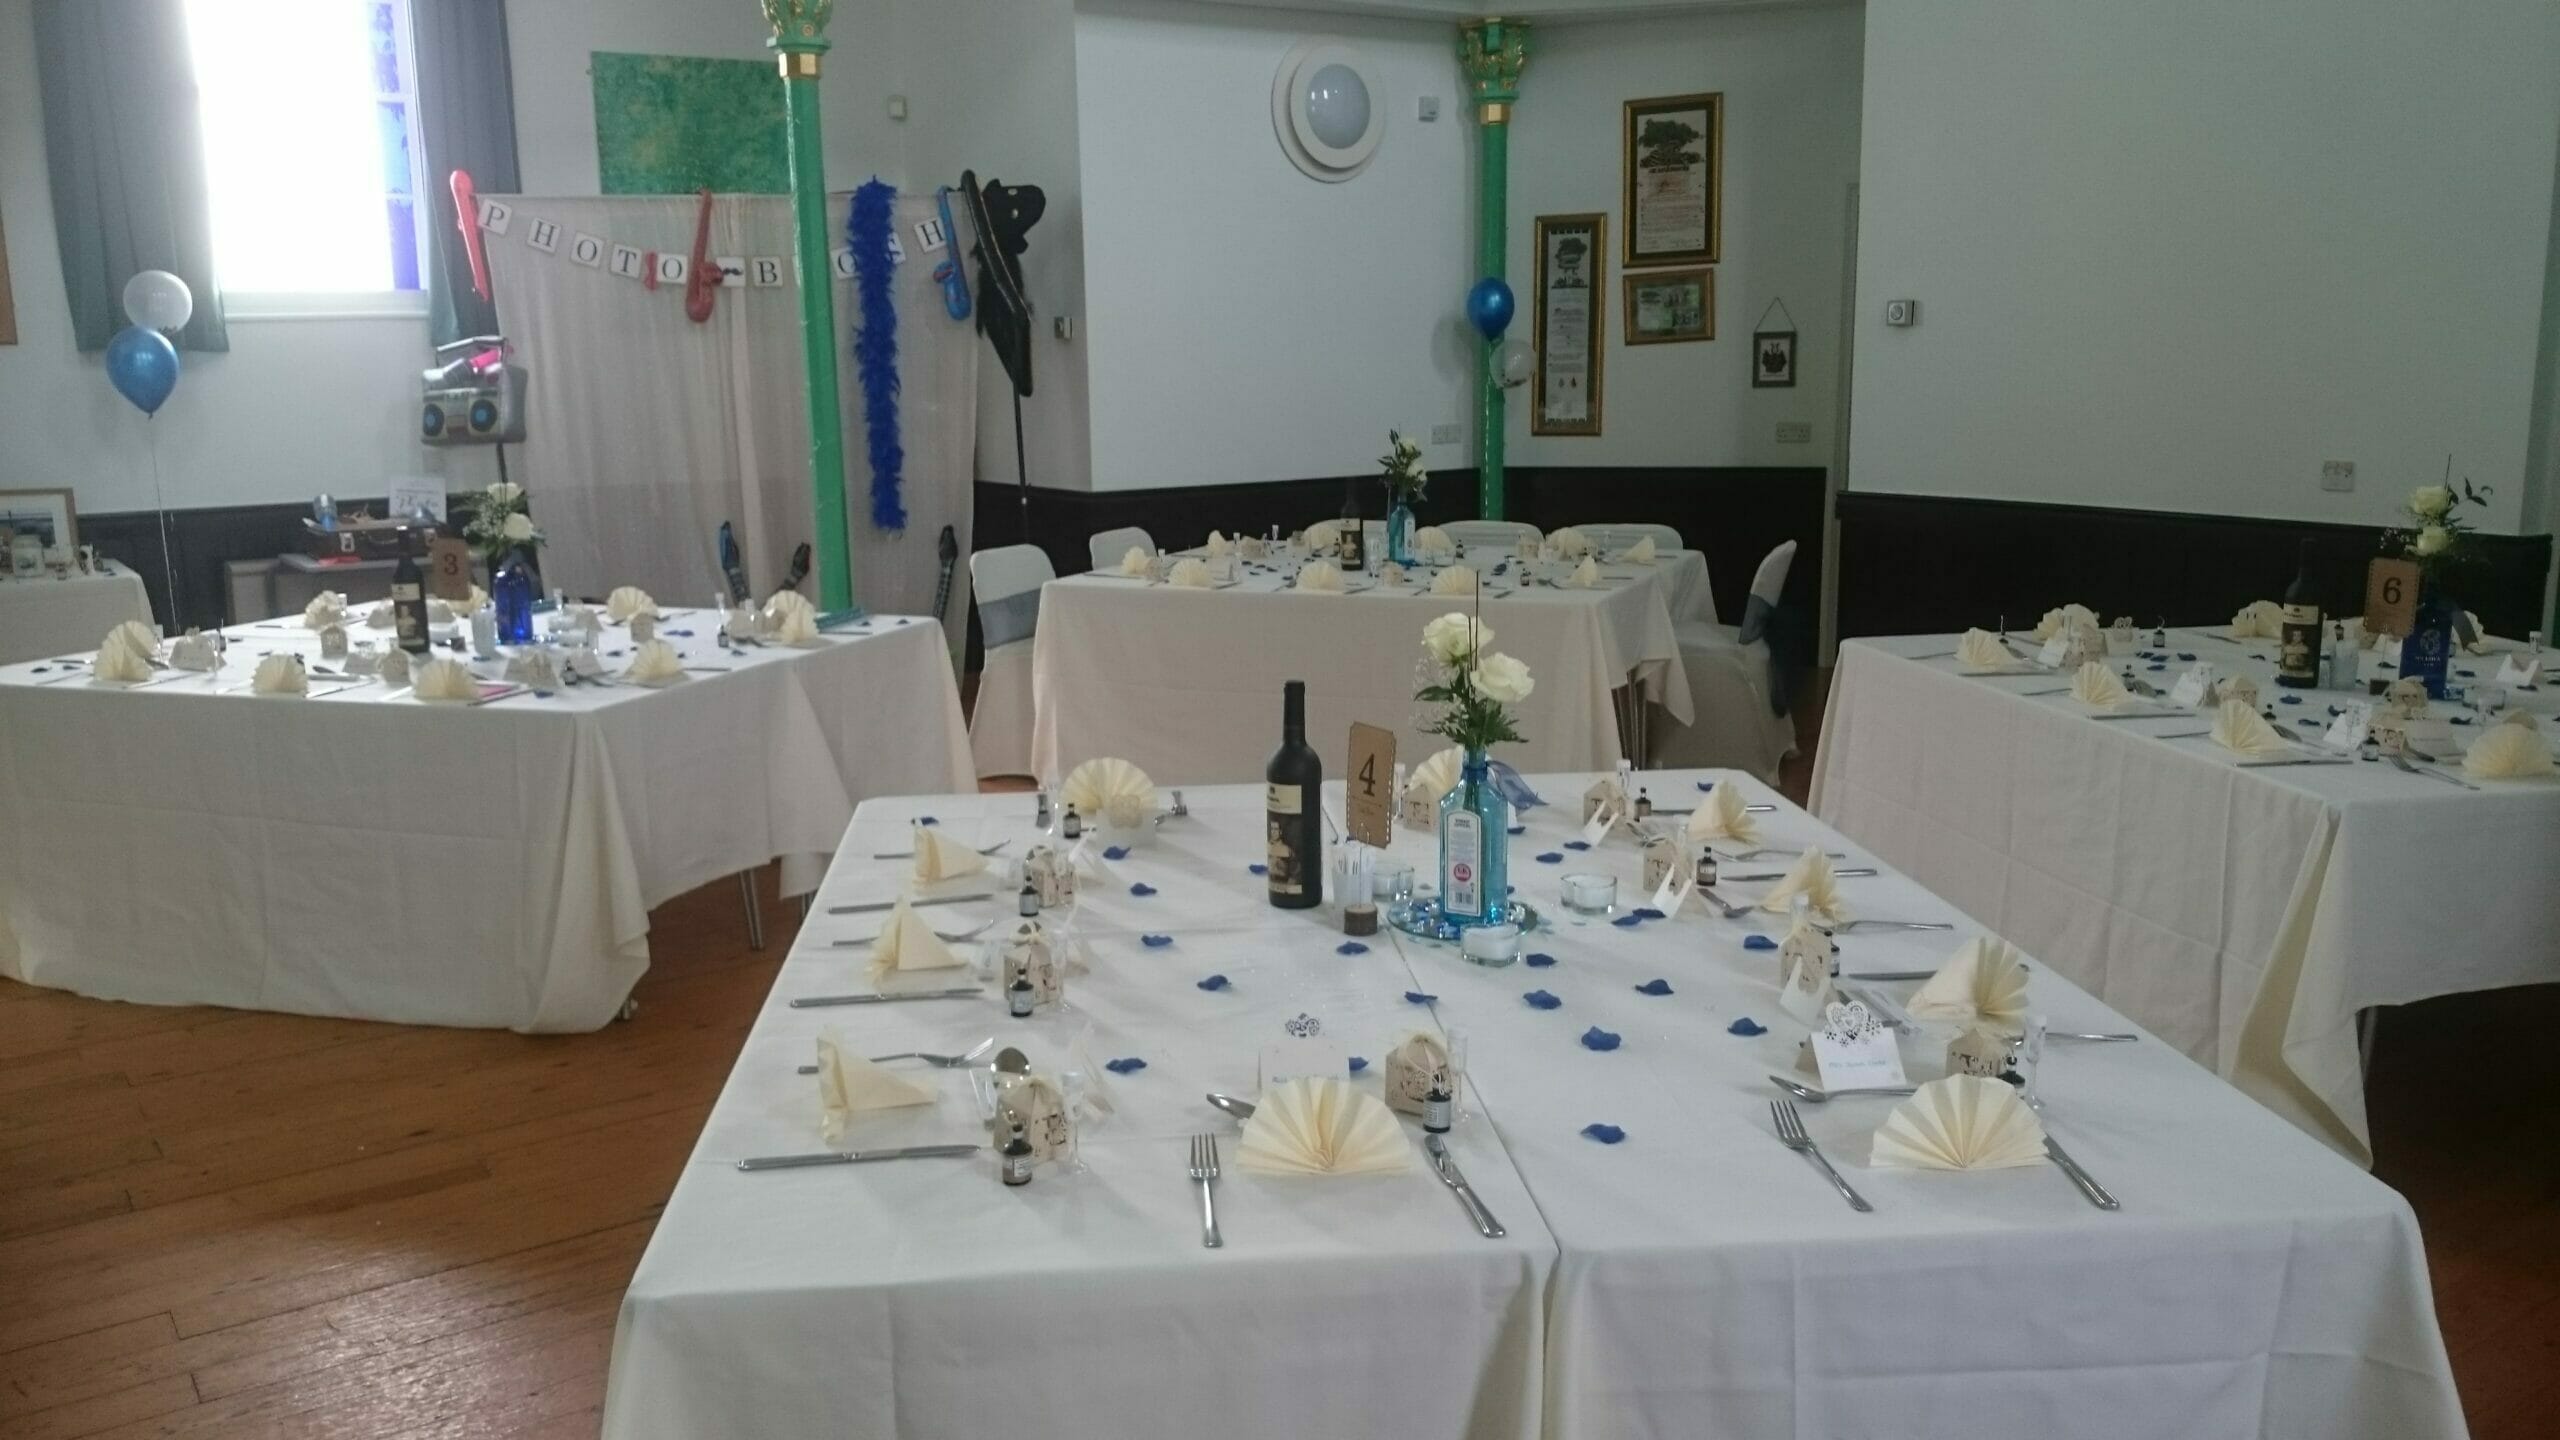 Photo shows a room layout with square tables